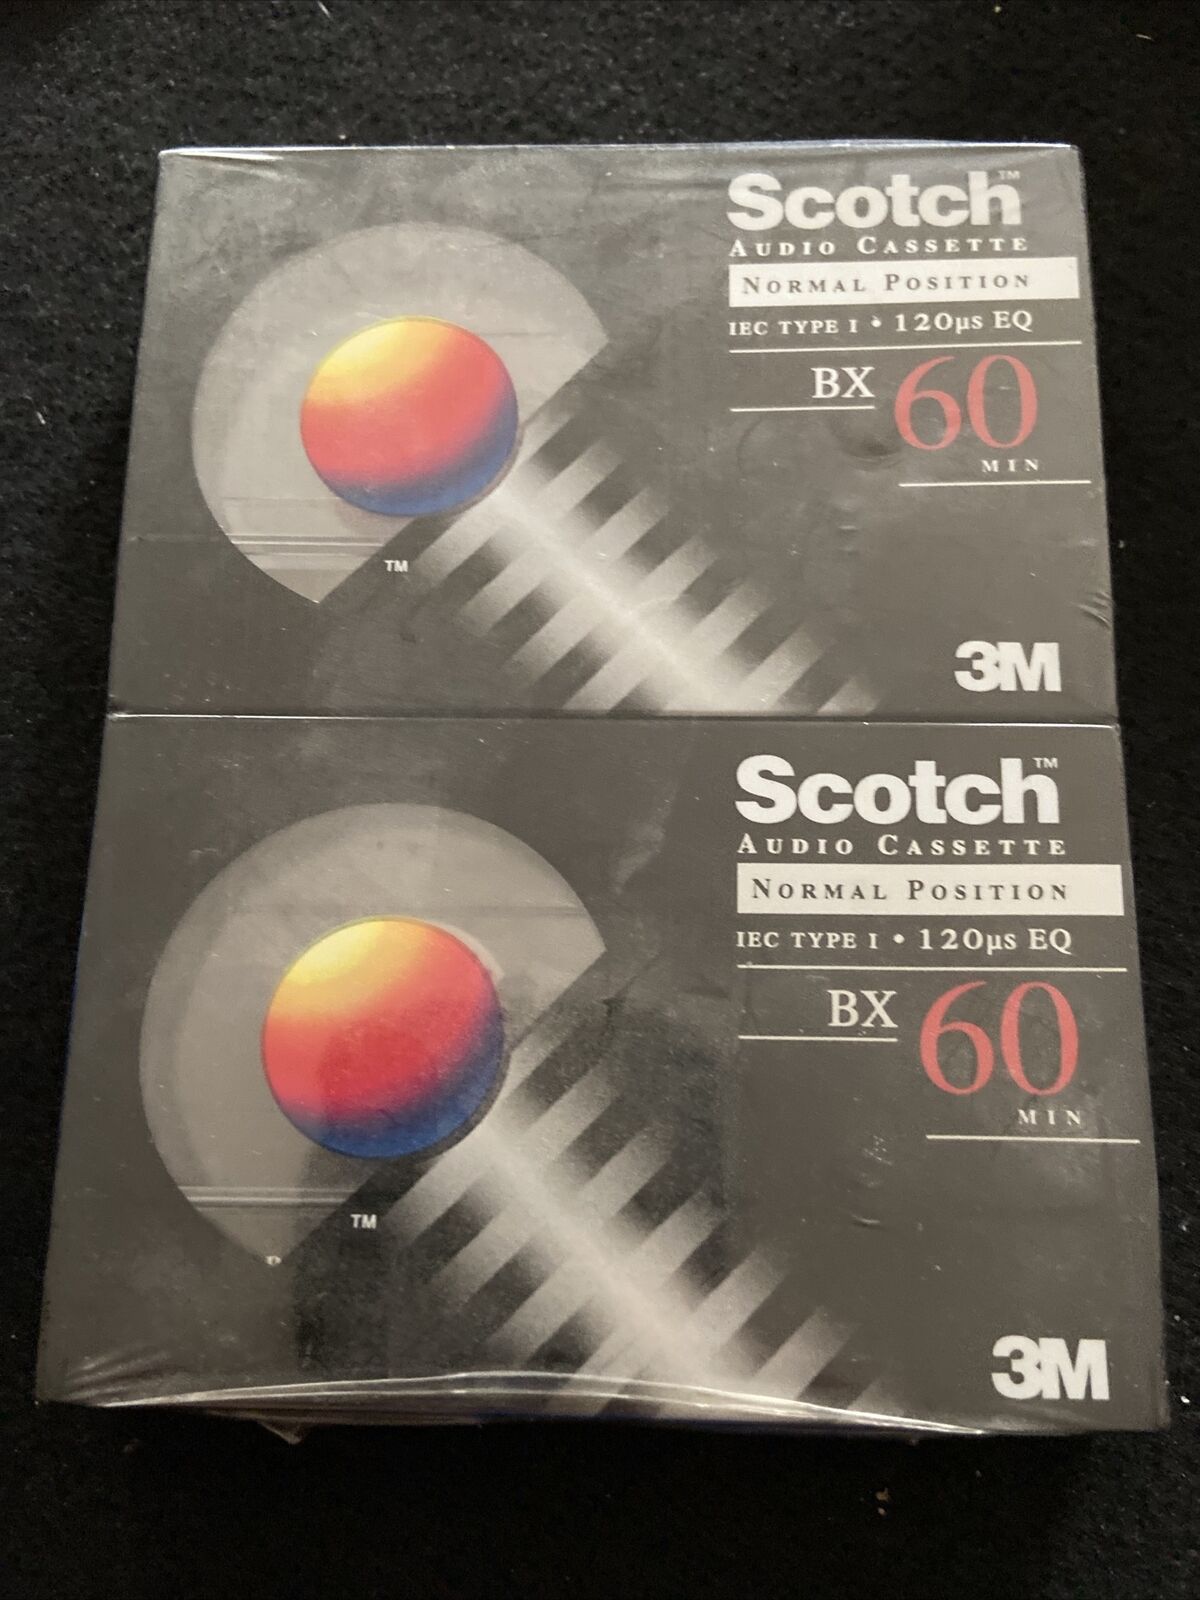 60 Min Blank Audio Cassette Tapes 2 Pack Sealed New 3m Scotch Brand Bx